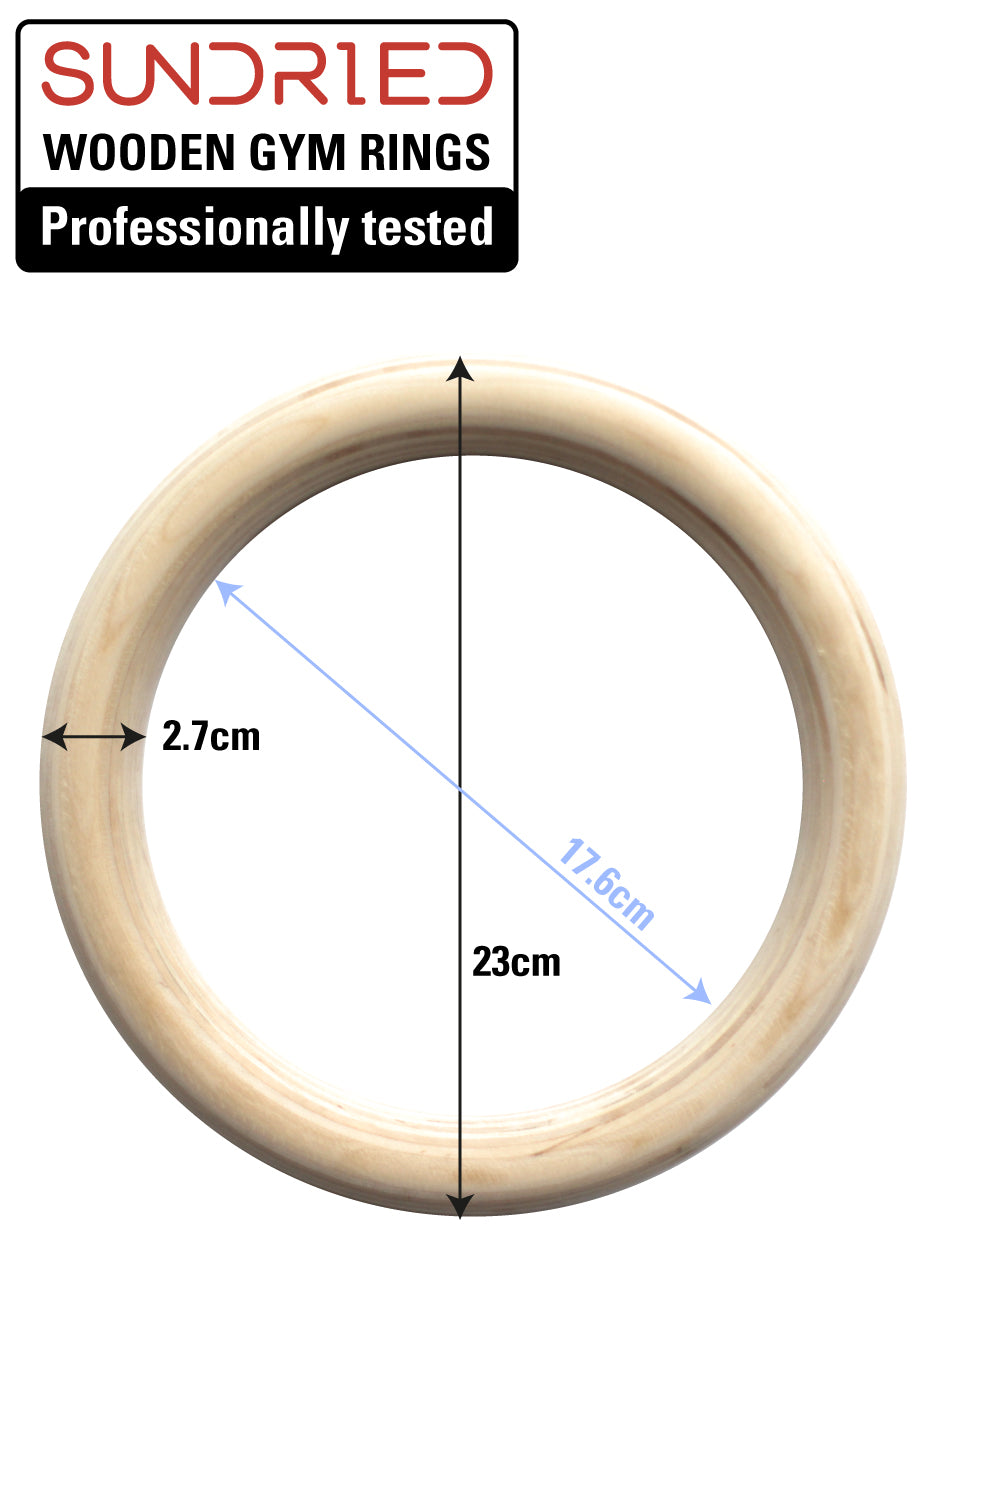 Amazon.com : Vulken Wooden Gymnastic Rings with Adjustable Numbered Straps.  1.1'' Olympic Rings for Core Workout and Bodyweight Training. Home Gym Rings  1600lbs with Workout Handles : Sports & Outdoors